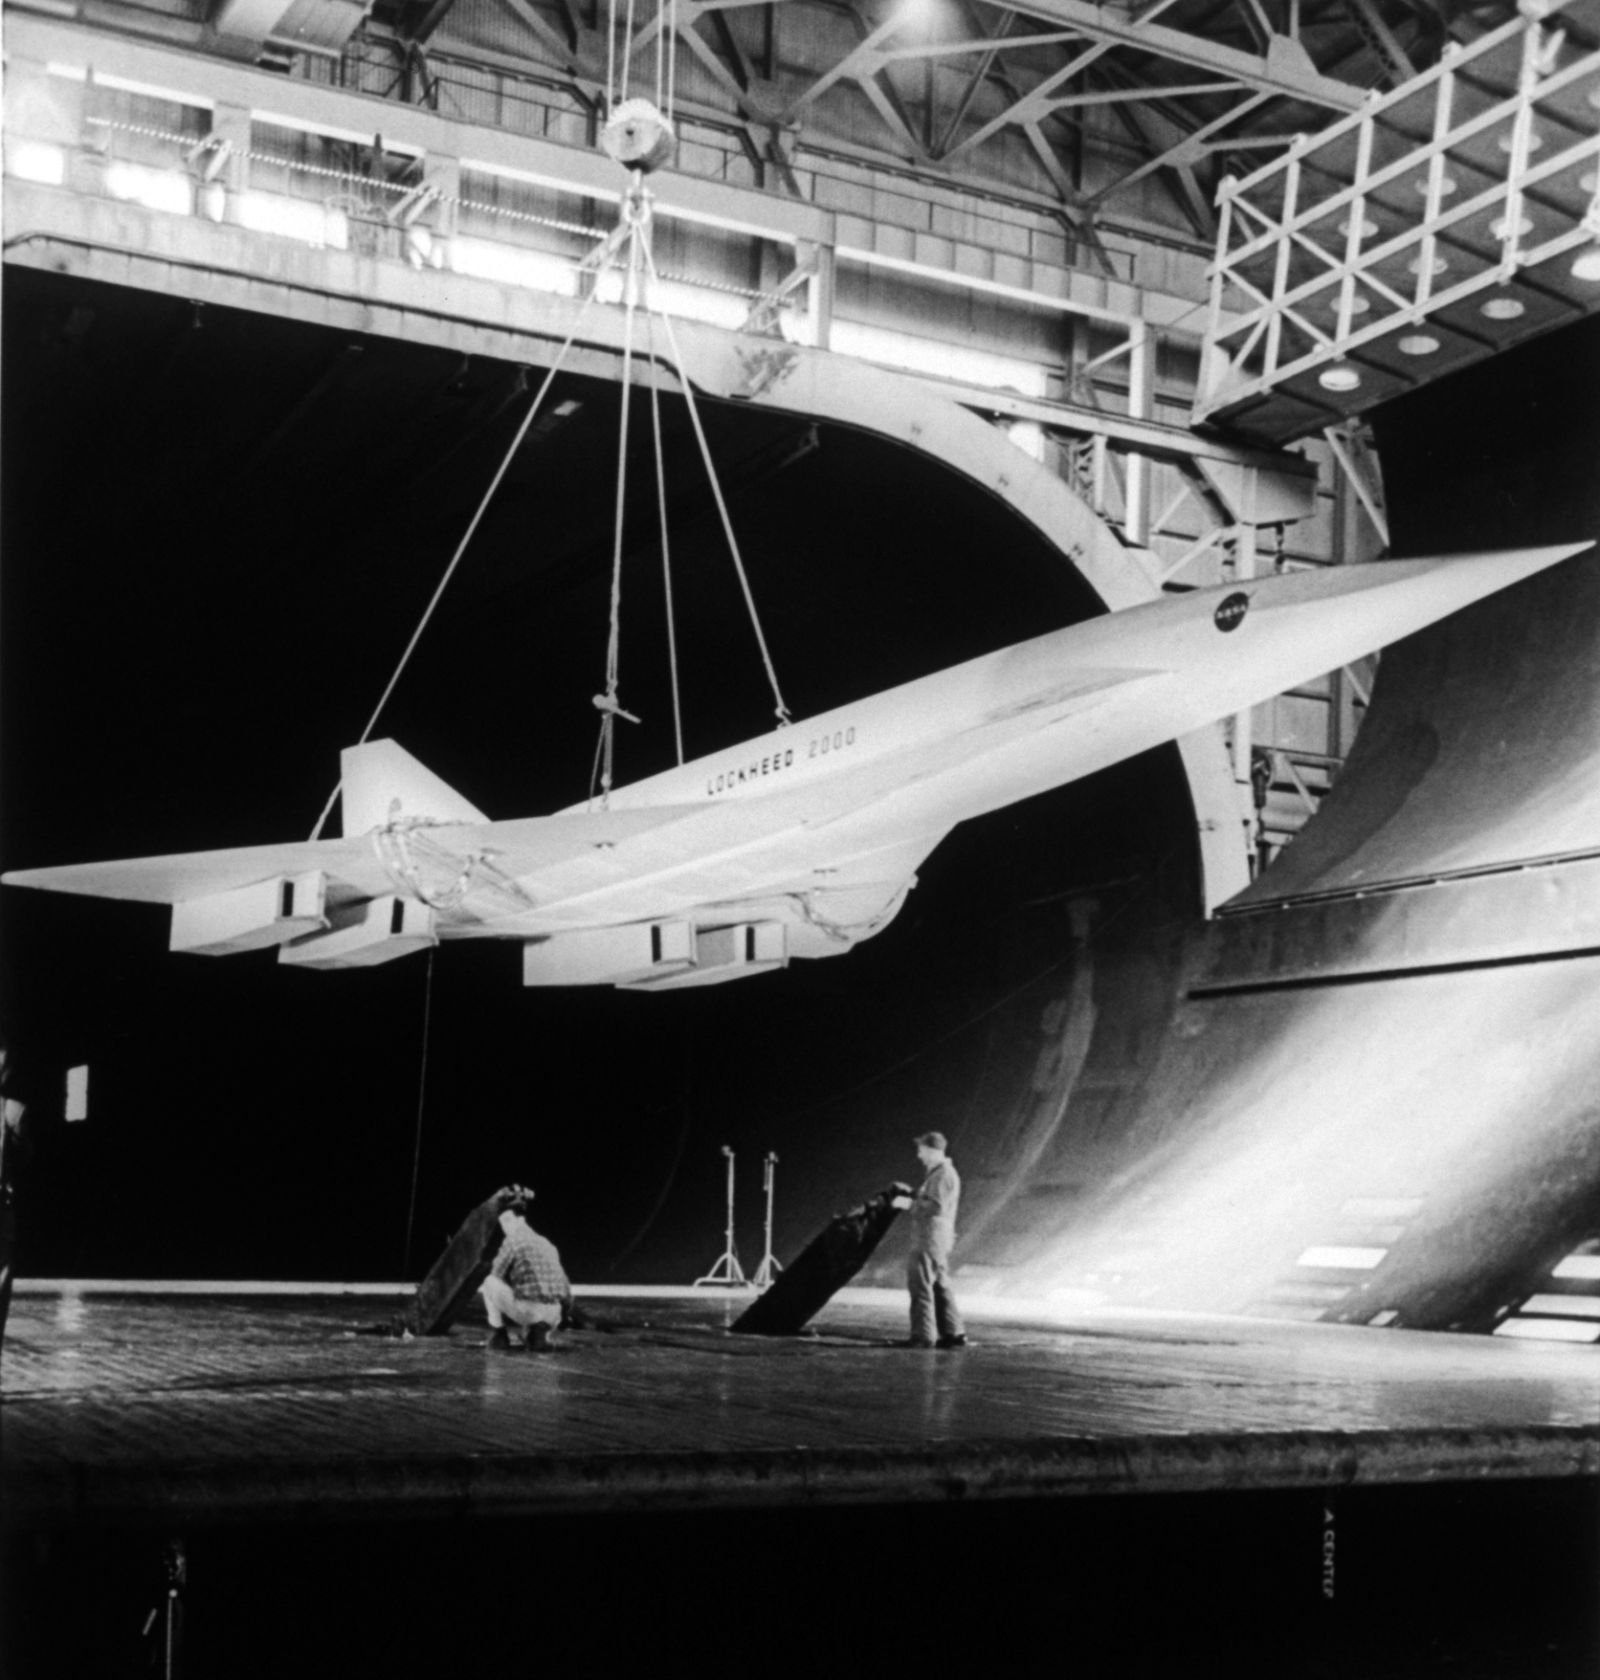 Lockheed L-2000 SST concept in the wind tunnel